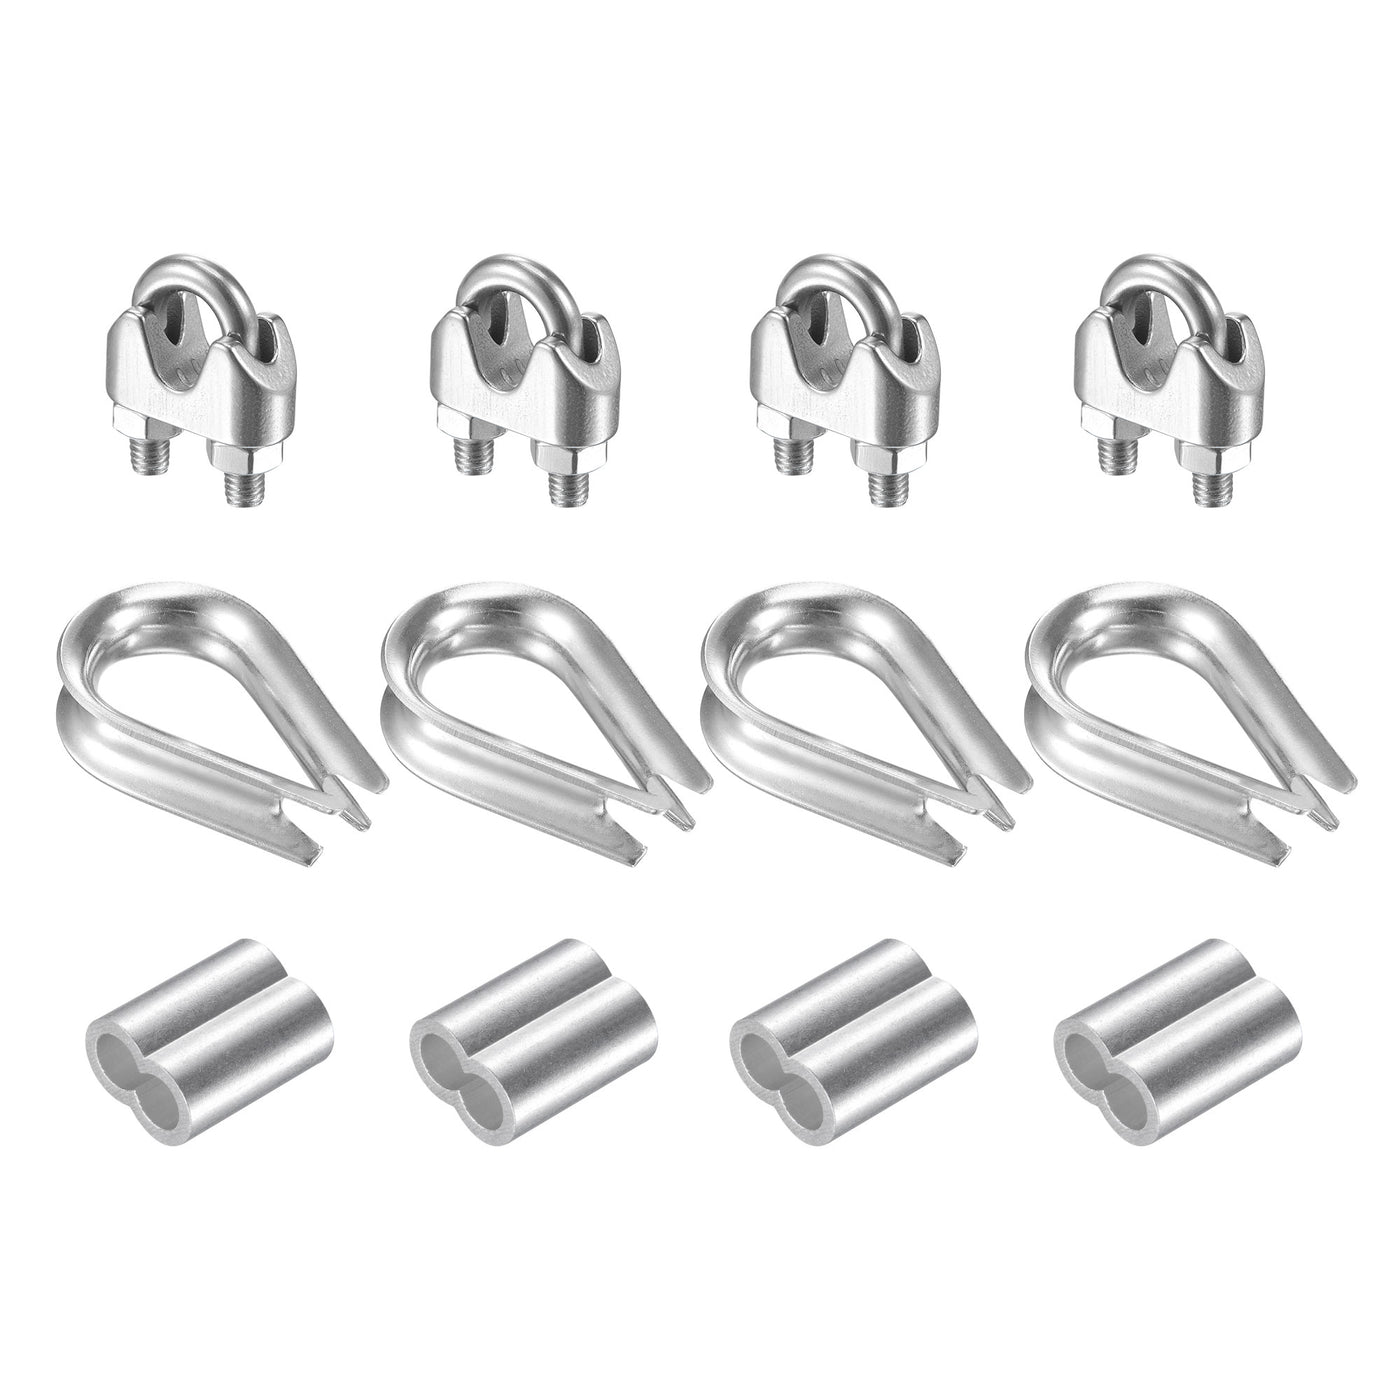 uxcell Uxcell Wire Rope Cable Clip Kit for M8, Included 304 Stainless Steel Rope Clamp, Thimble Rigging, Aluminum Crimping Loop Sleeve 4 Set